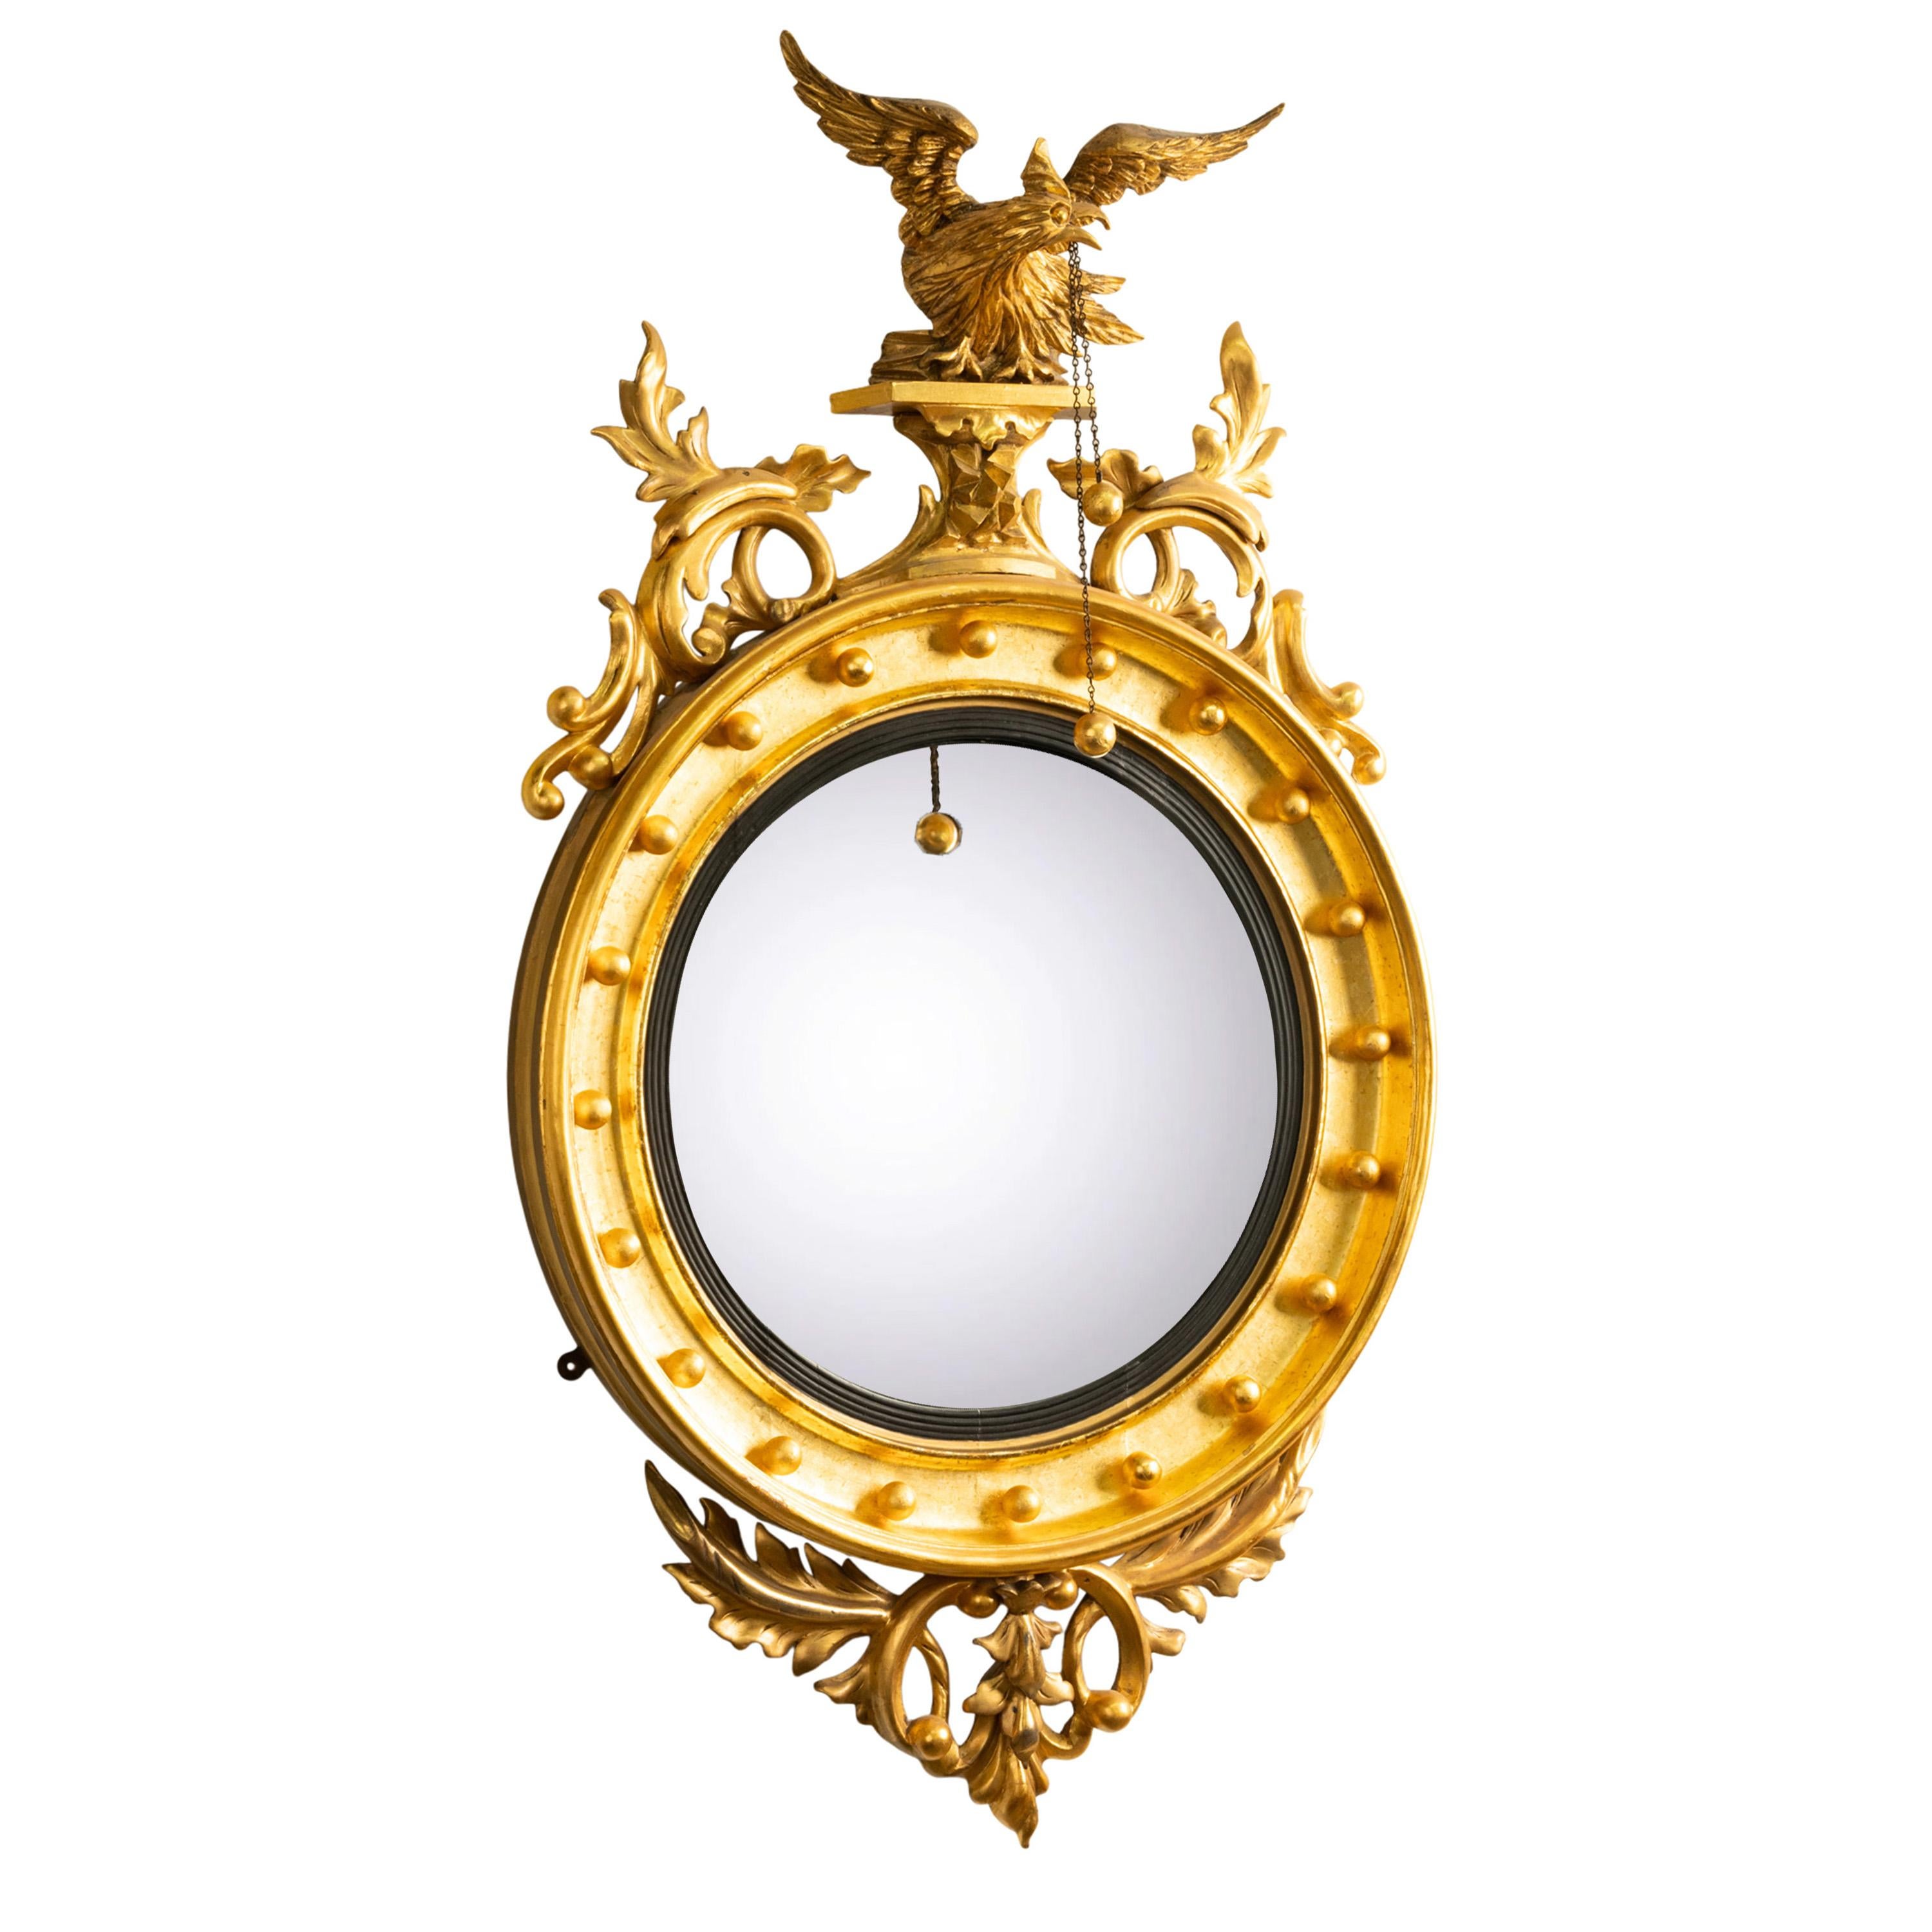 A fine antique American Federal period convex gilt wood looking Glass/ mirror, circa 1820.
The mirror sumounted with a carved eagle on a plinth, the eagle with a chain suspended from it's beak with two gilt spheres, the eagle is flanked by stylised